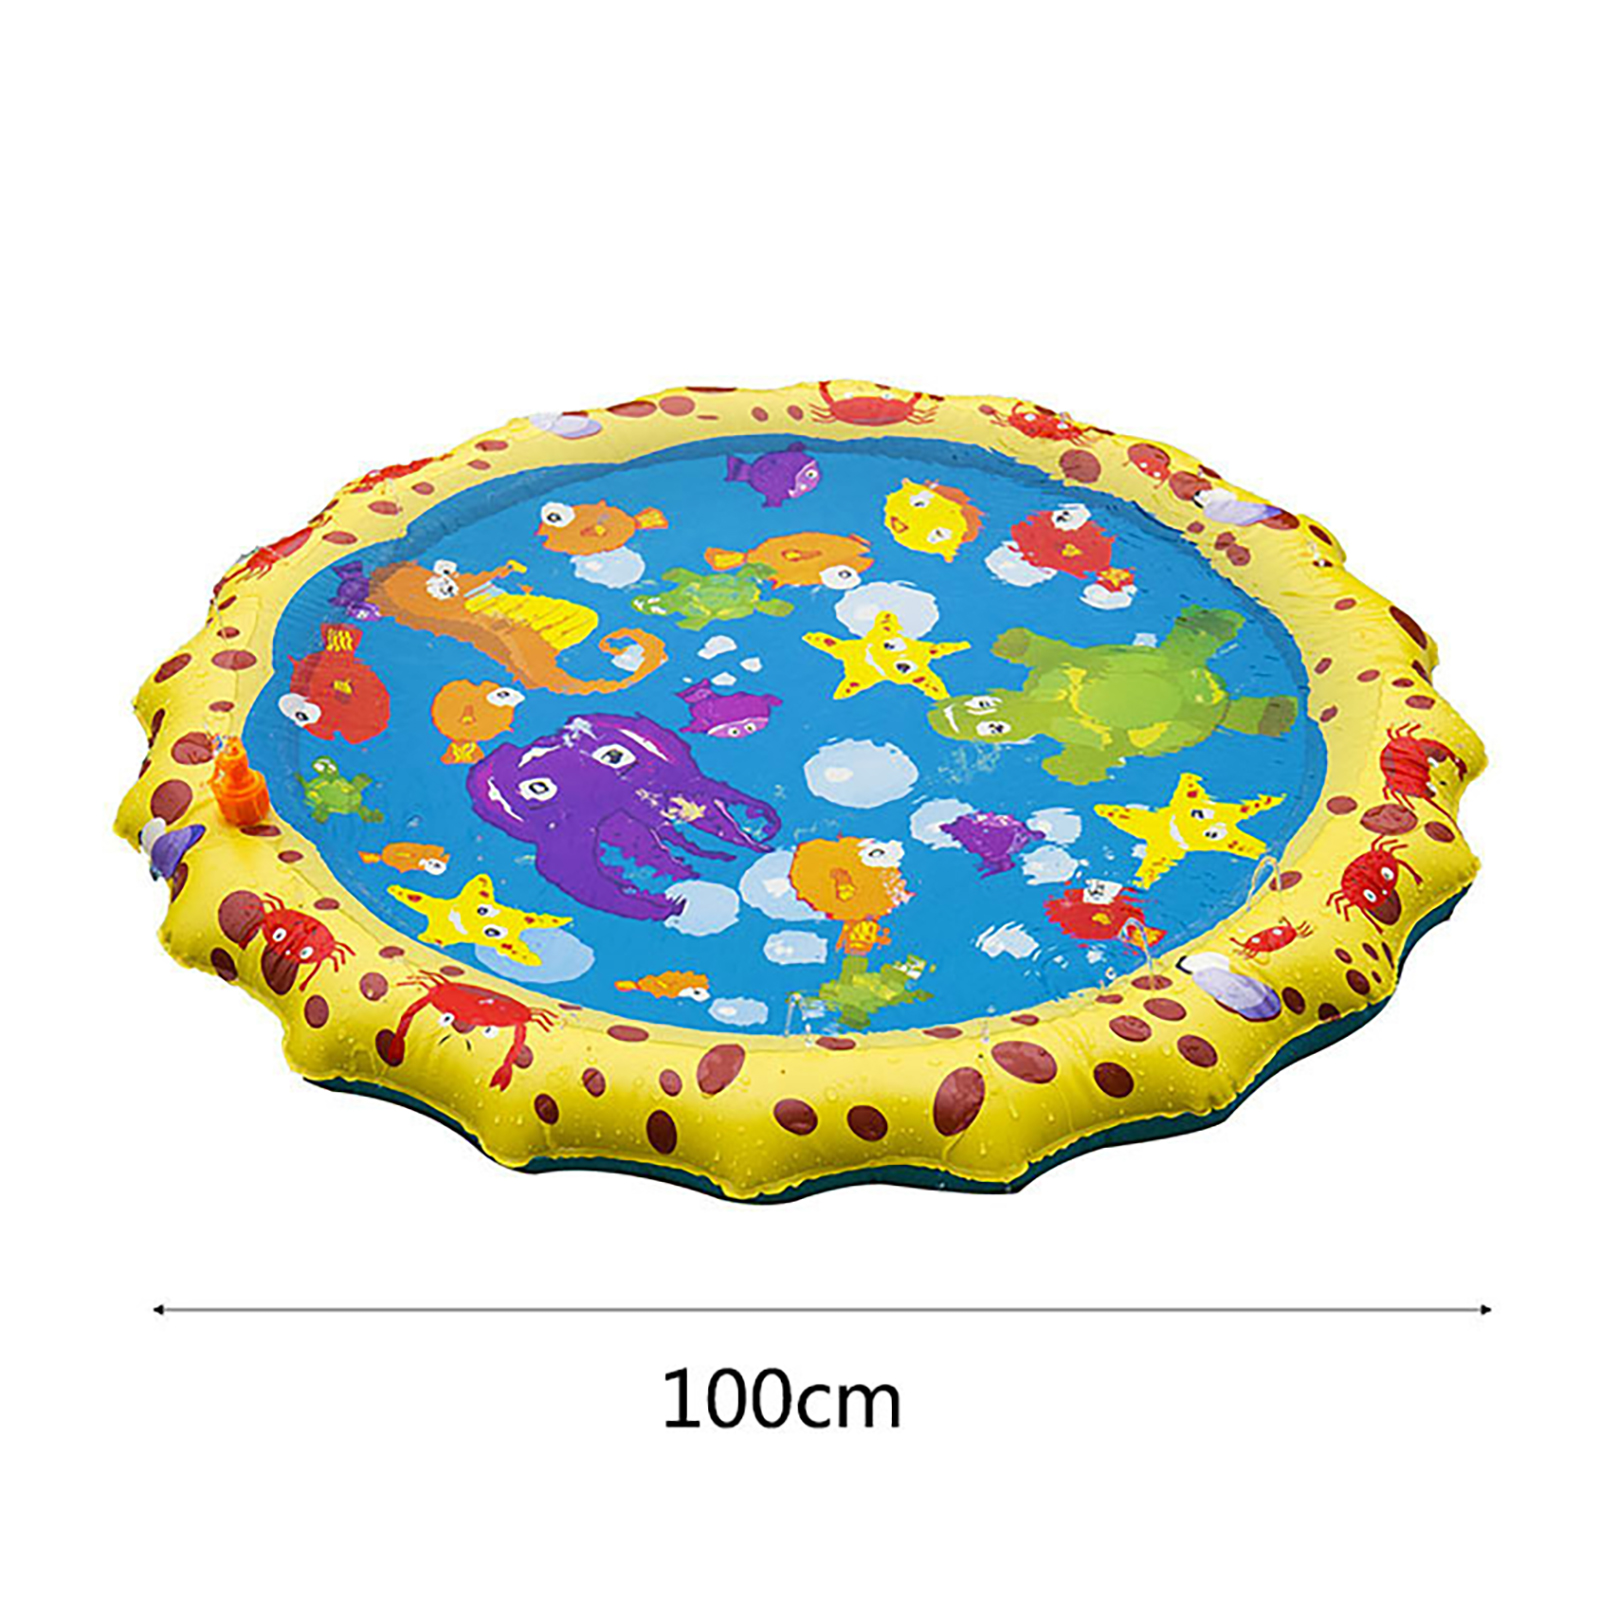 Sprinkler Pad For Kids 39” Sprinkler Play Mat Outdoor Pool Party Water Play Toys Water Play Game For Kids Pets